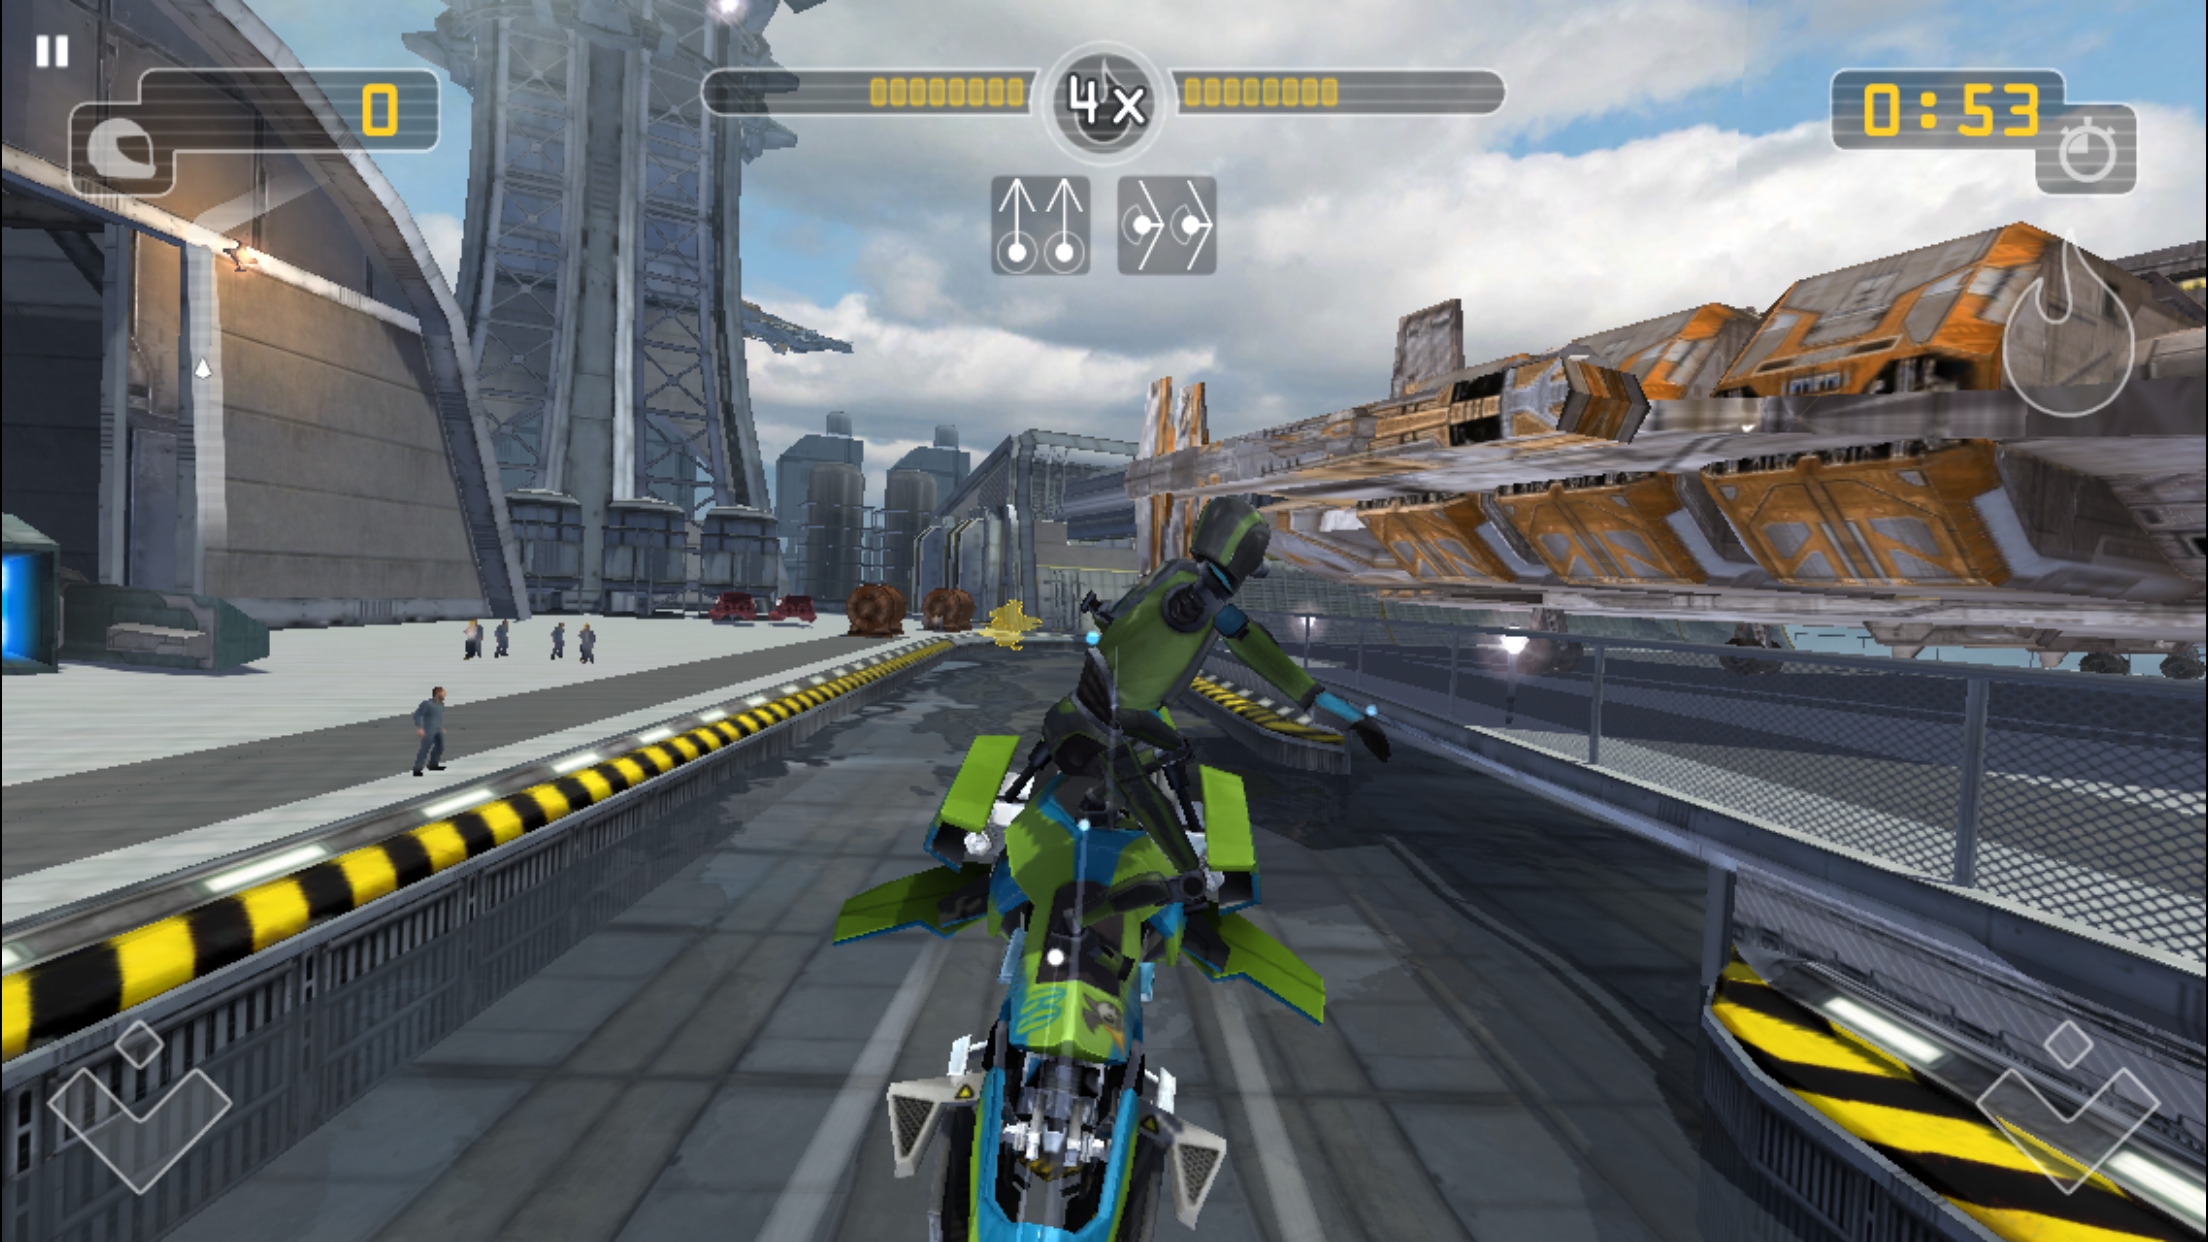 Riptide gp renegade game free download for android